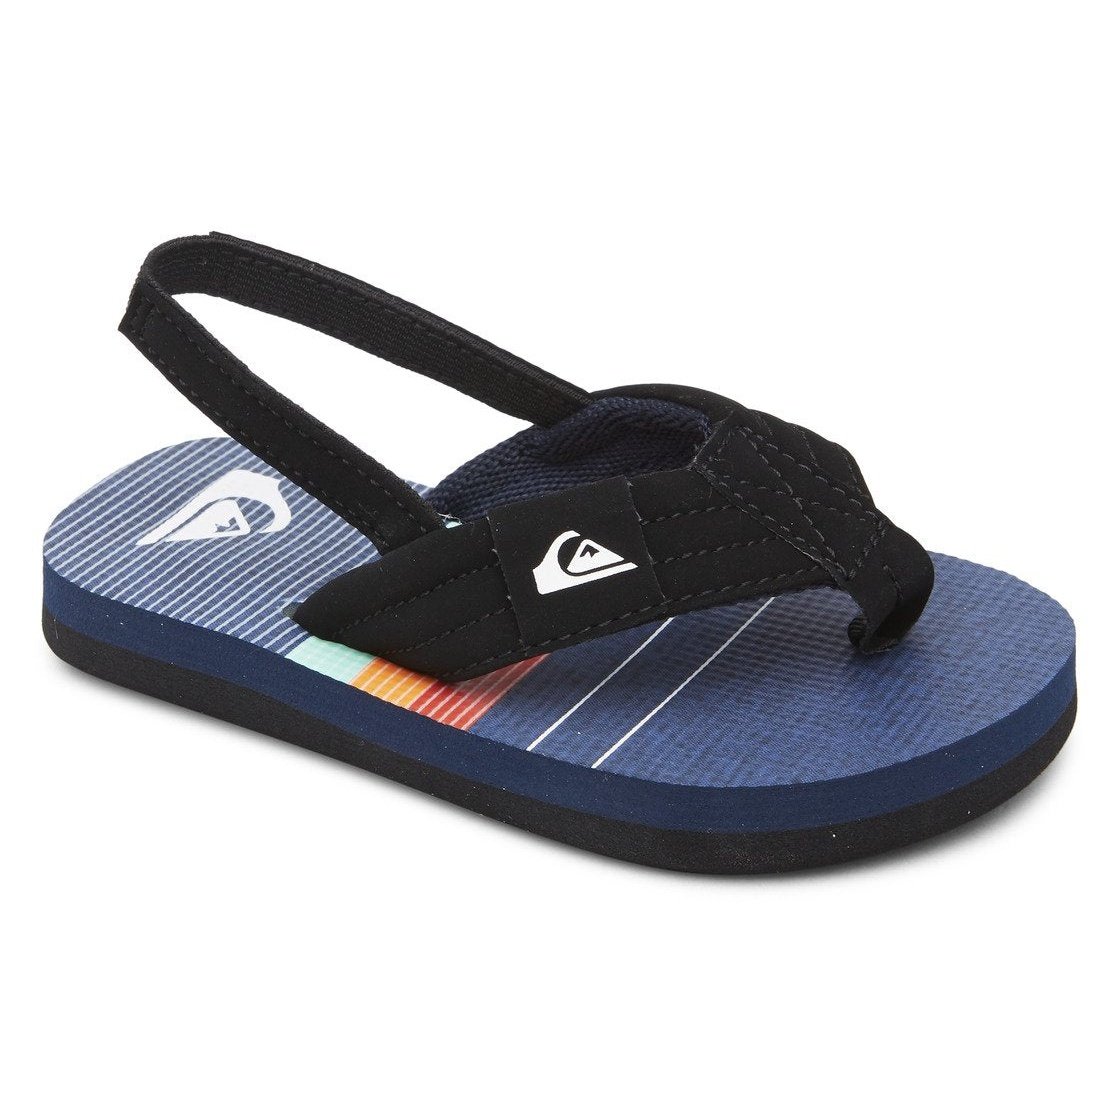 Molokai Layback Sandals for Toddlers - Sporty Pro